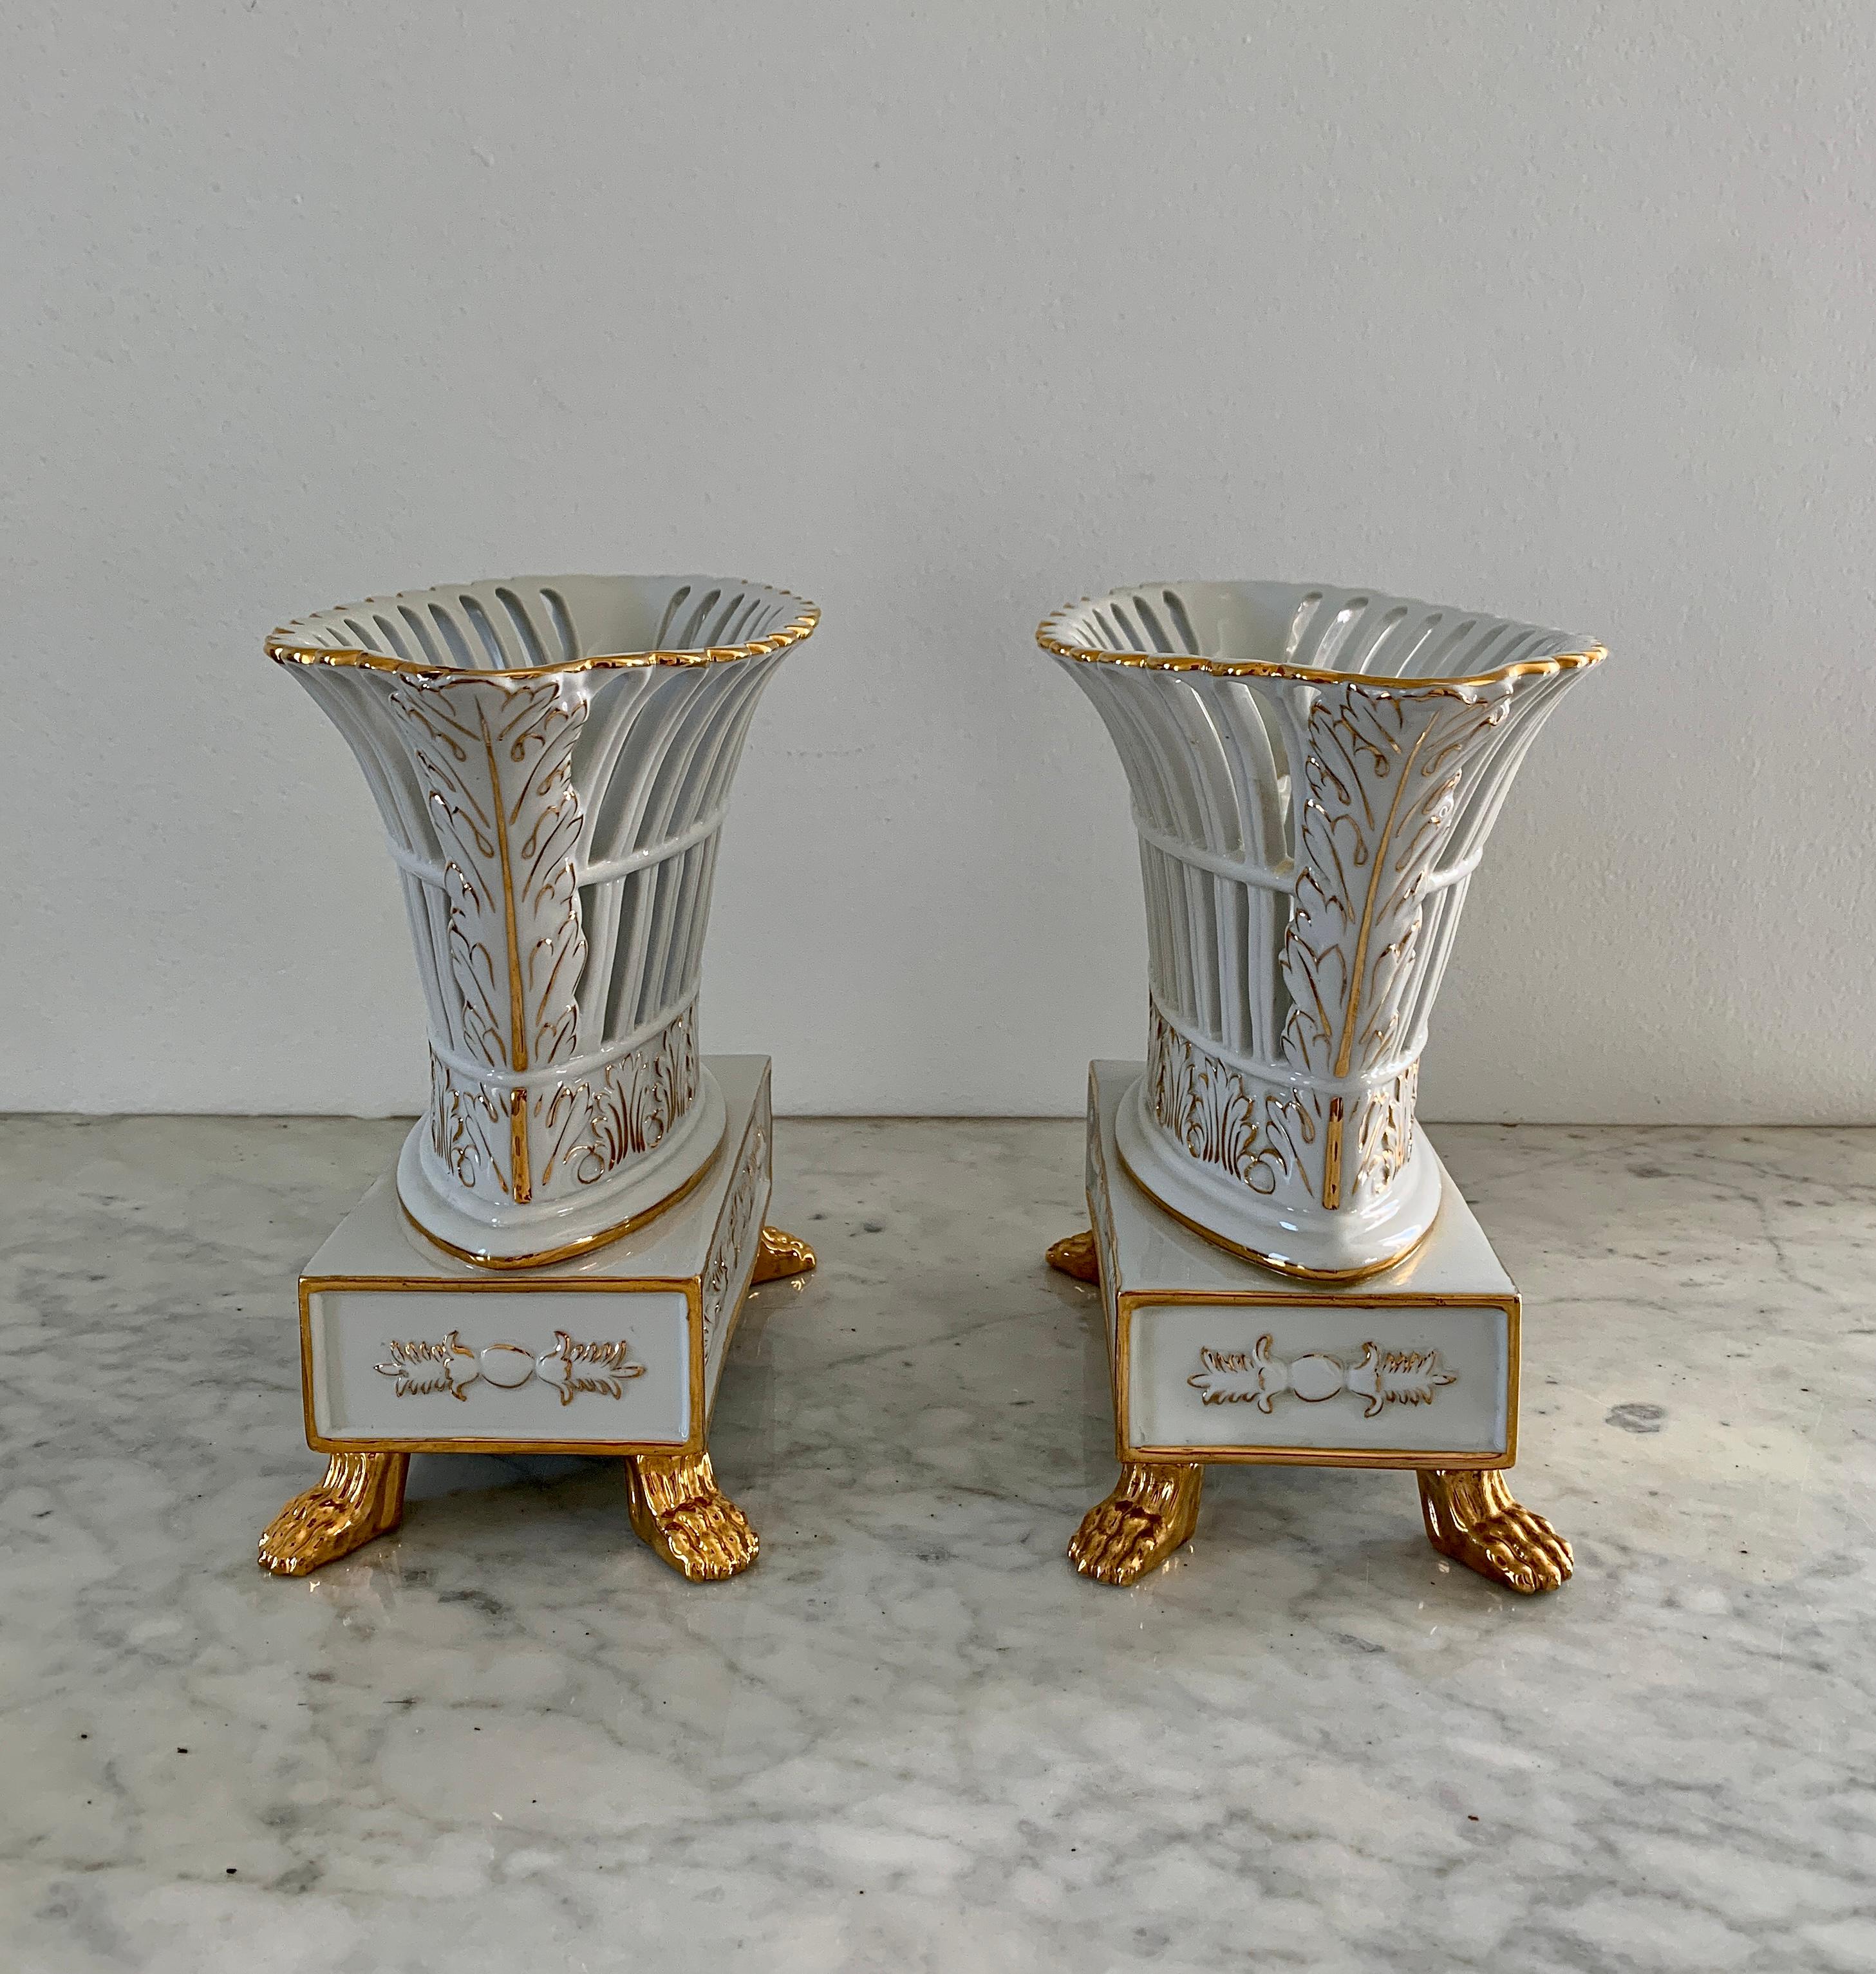 American Neoclassical Regency Reticulated Gold Gilt Porcelain Basket Compotes, Pair For Sale